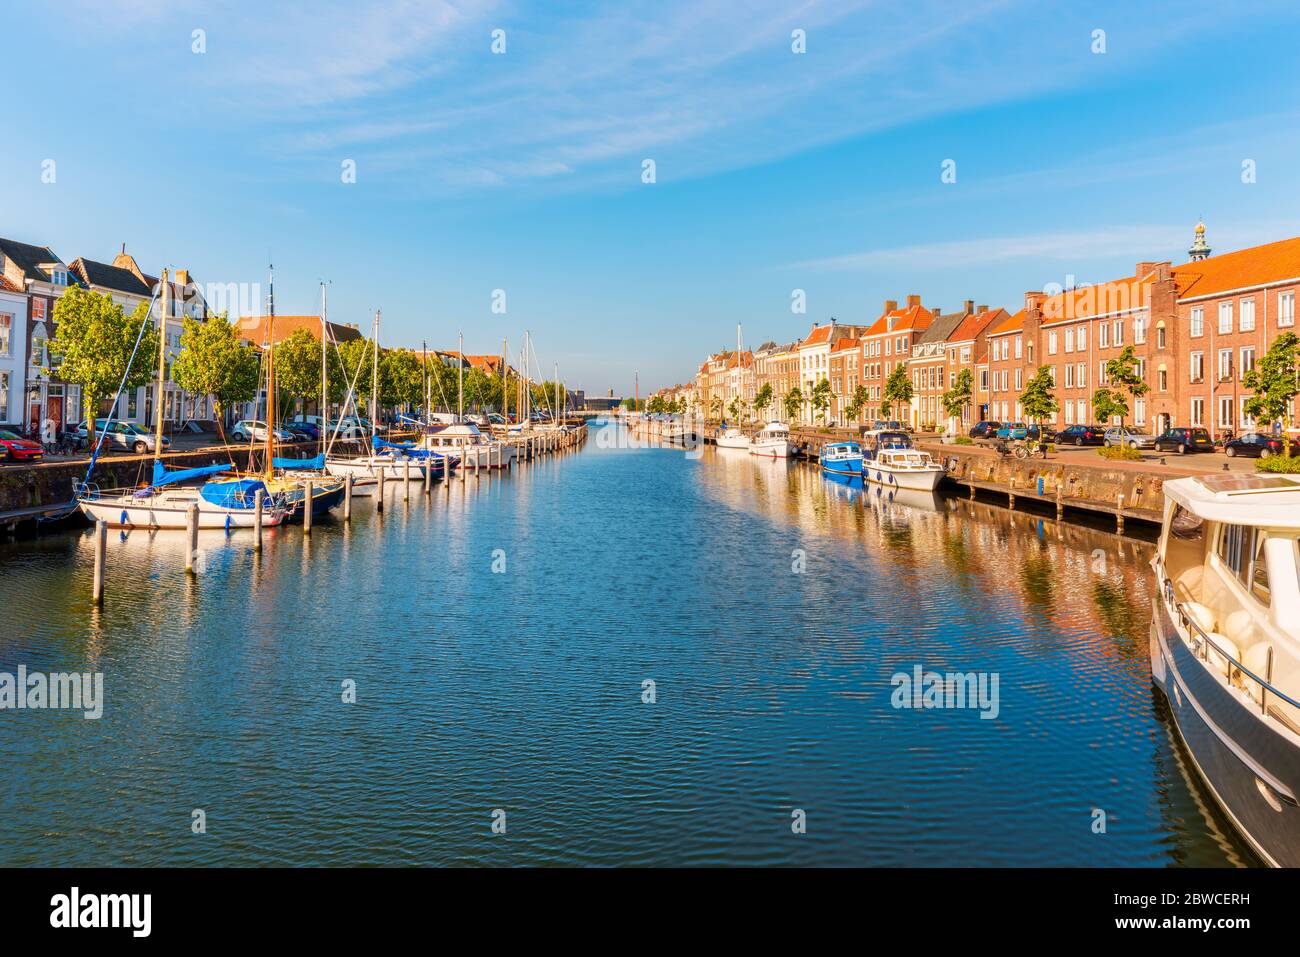 Boats in Canal in Middelburg, Zeeland province, Netherlands. Middelburg is the capital of Zeeland and has about 42,000 inhabitants. Stock Photo